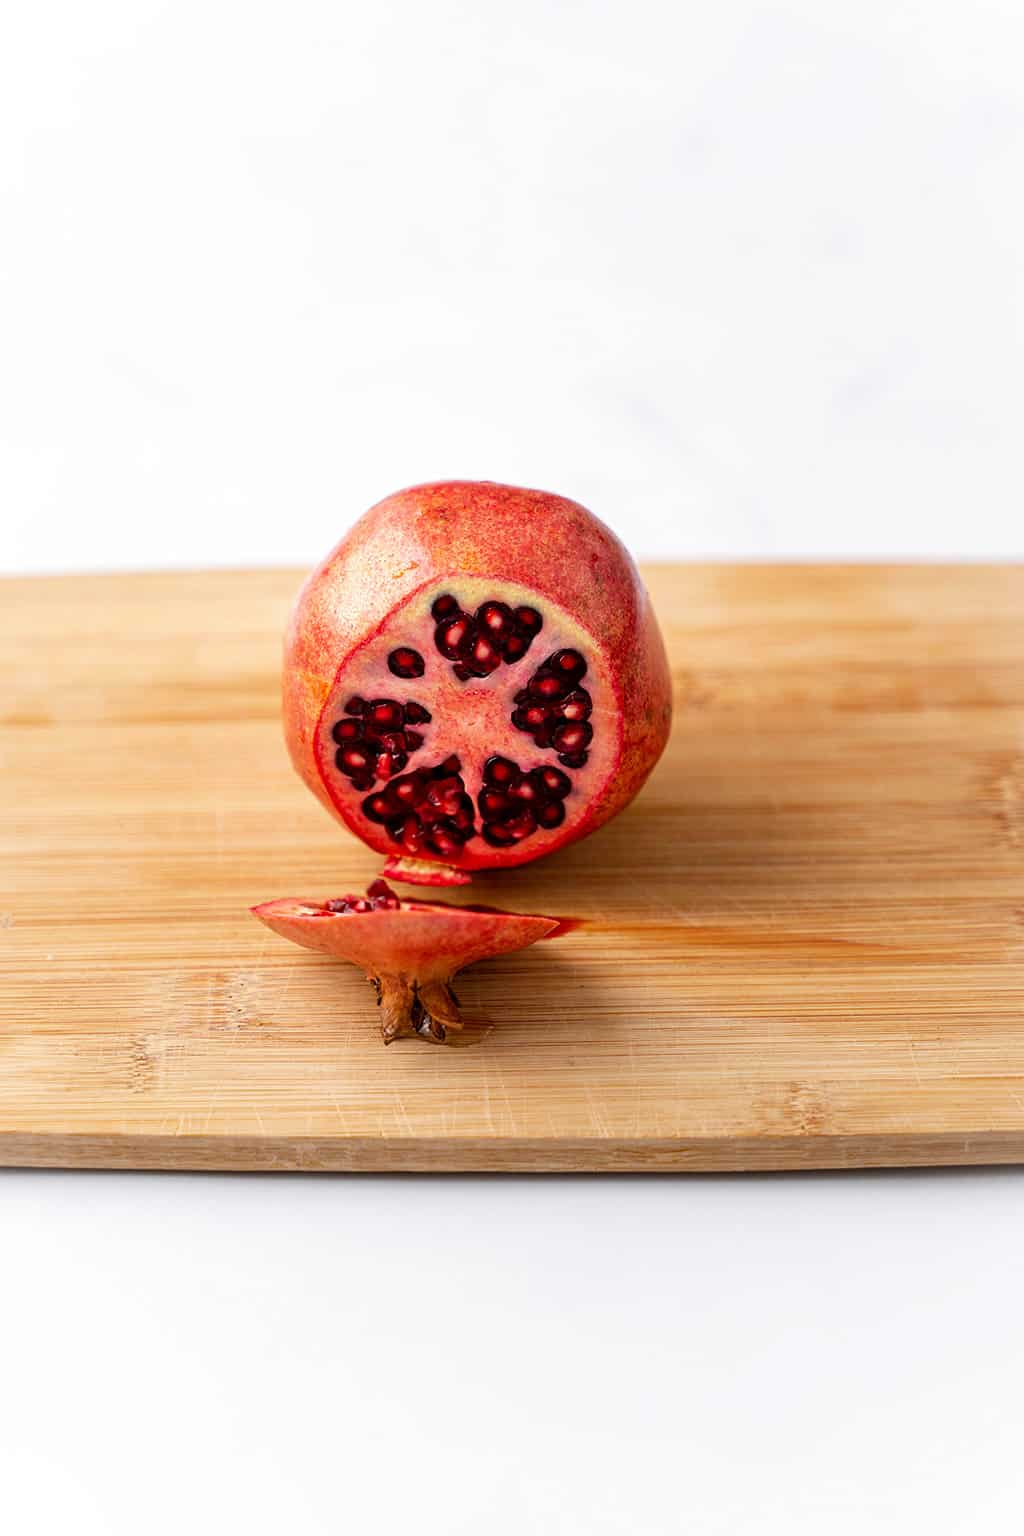 one end of the pomegranate sliced 